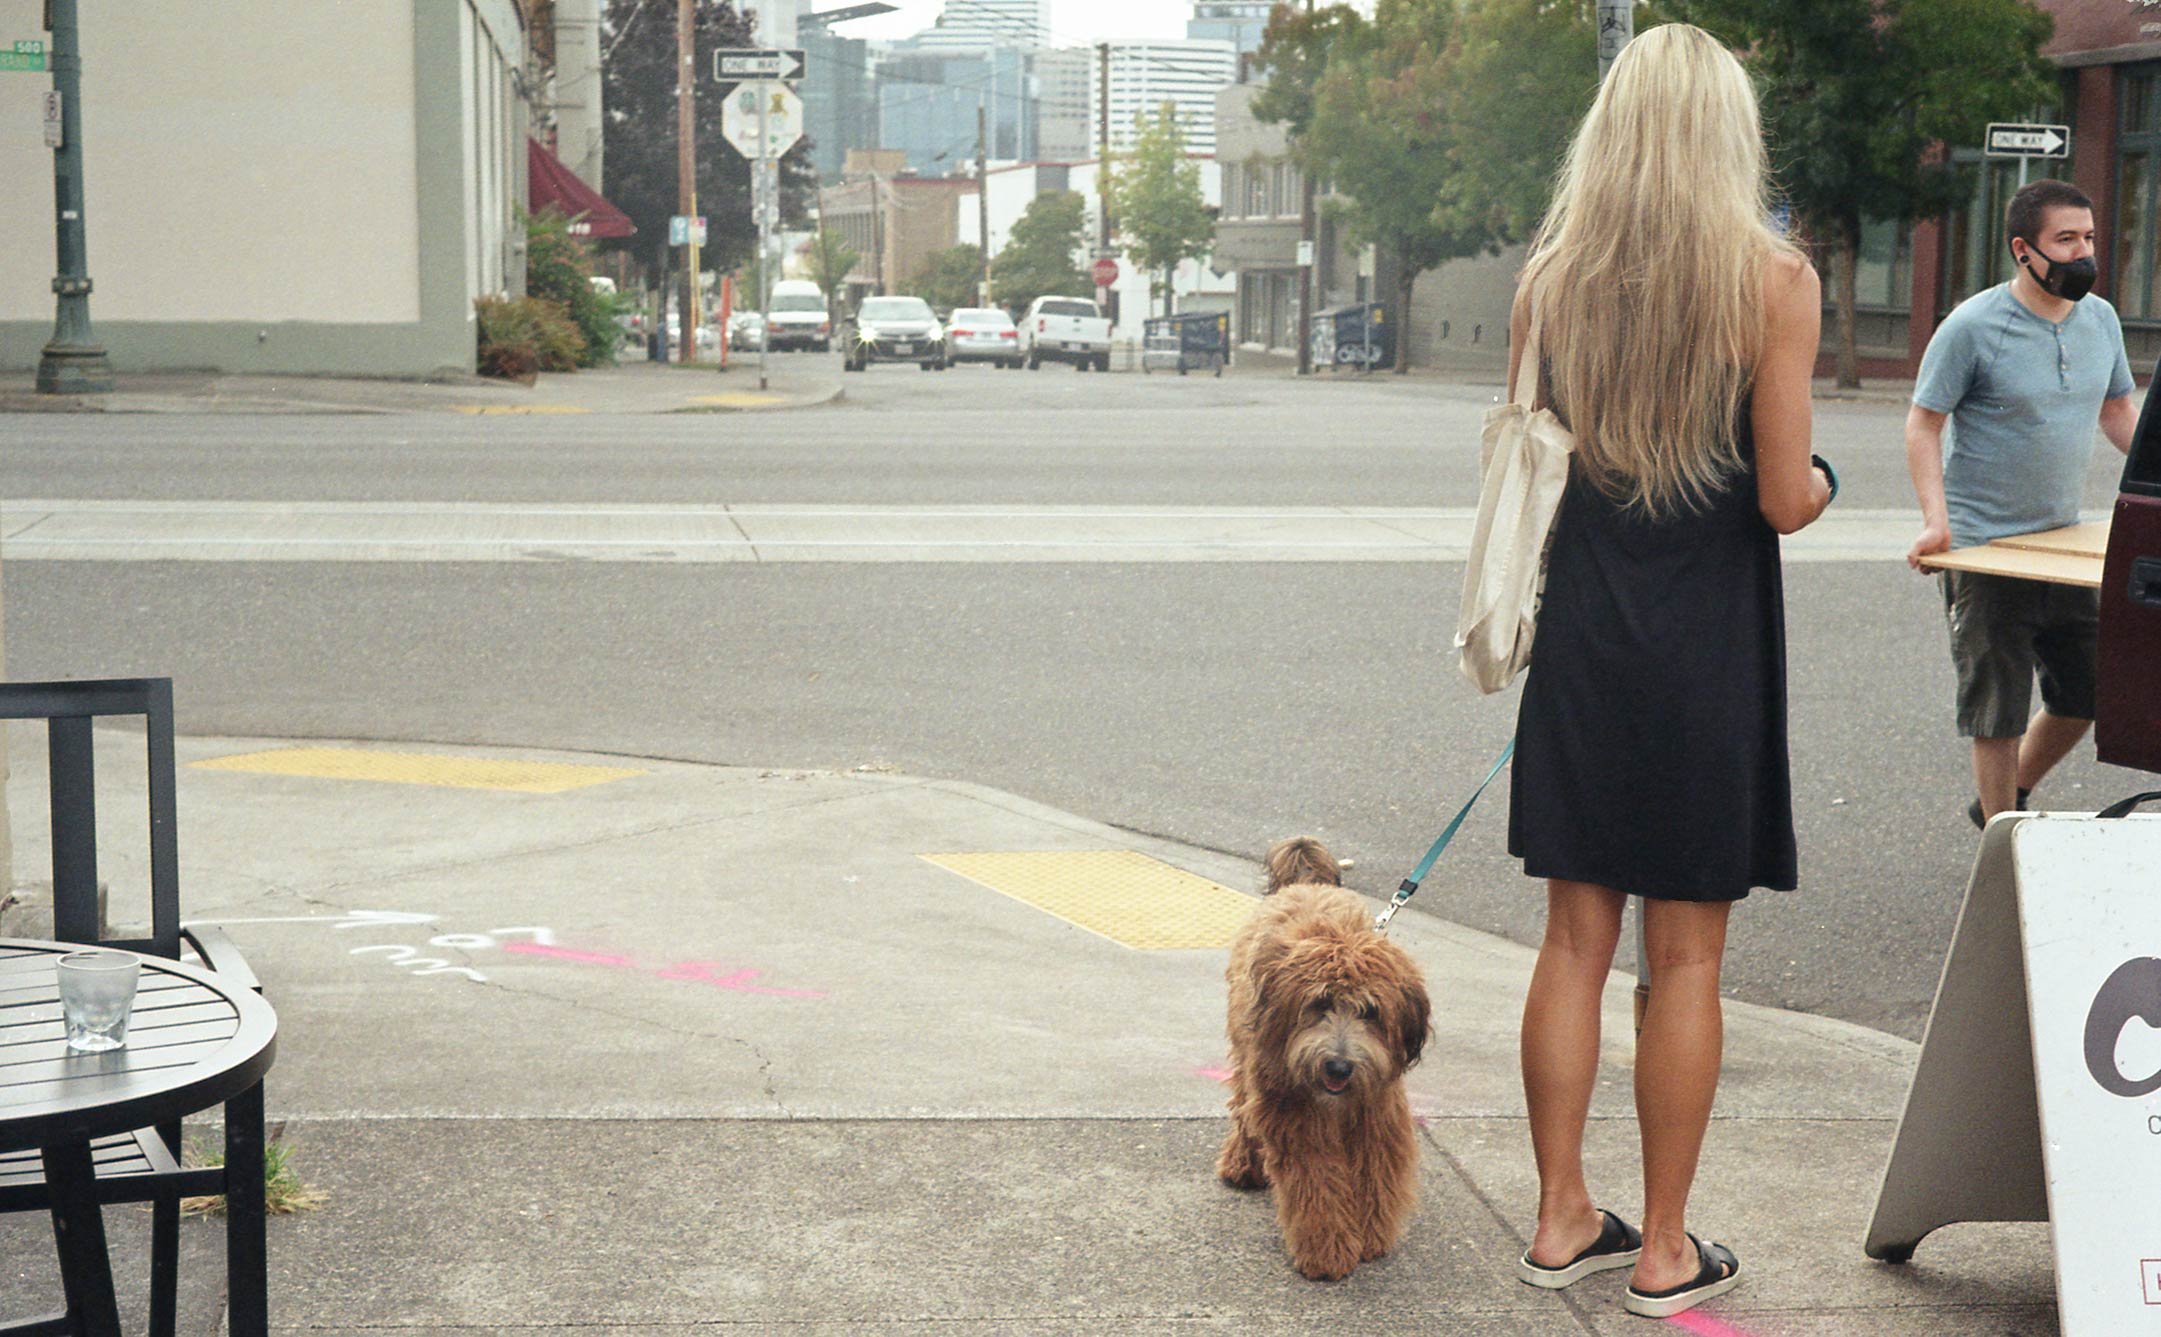 Shaggy Dog and Woman, SE Grand Ave., Portland OR, July 2022